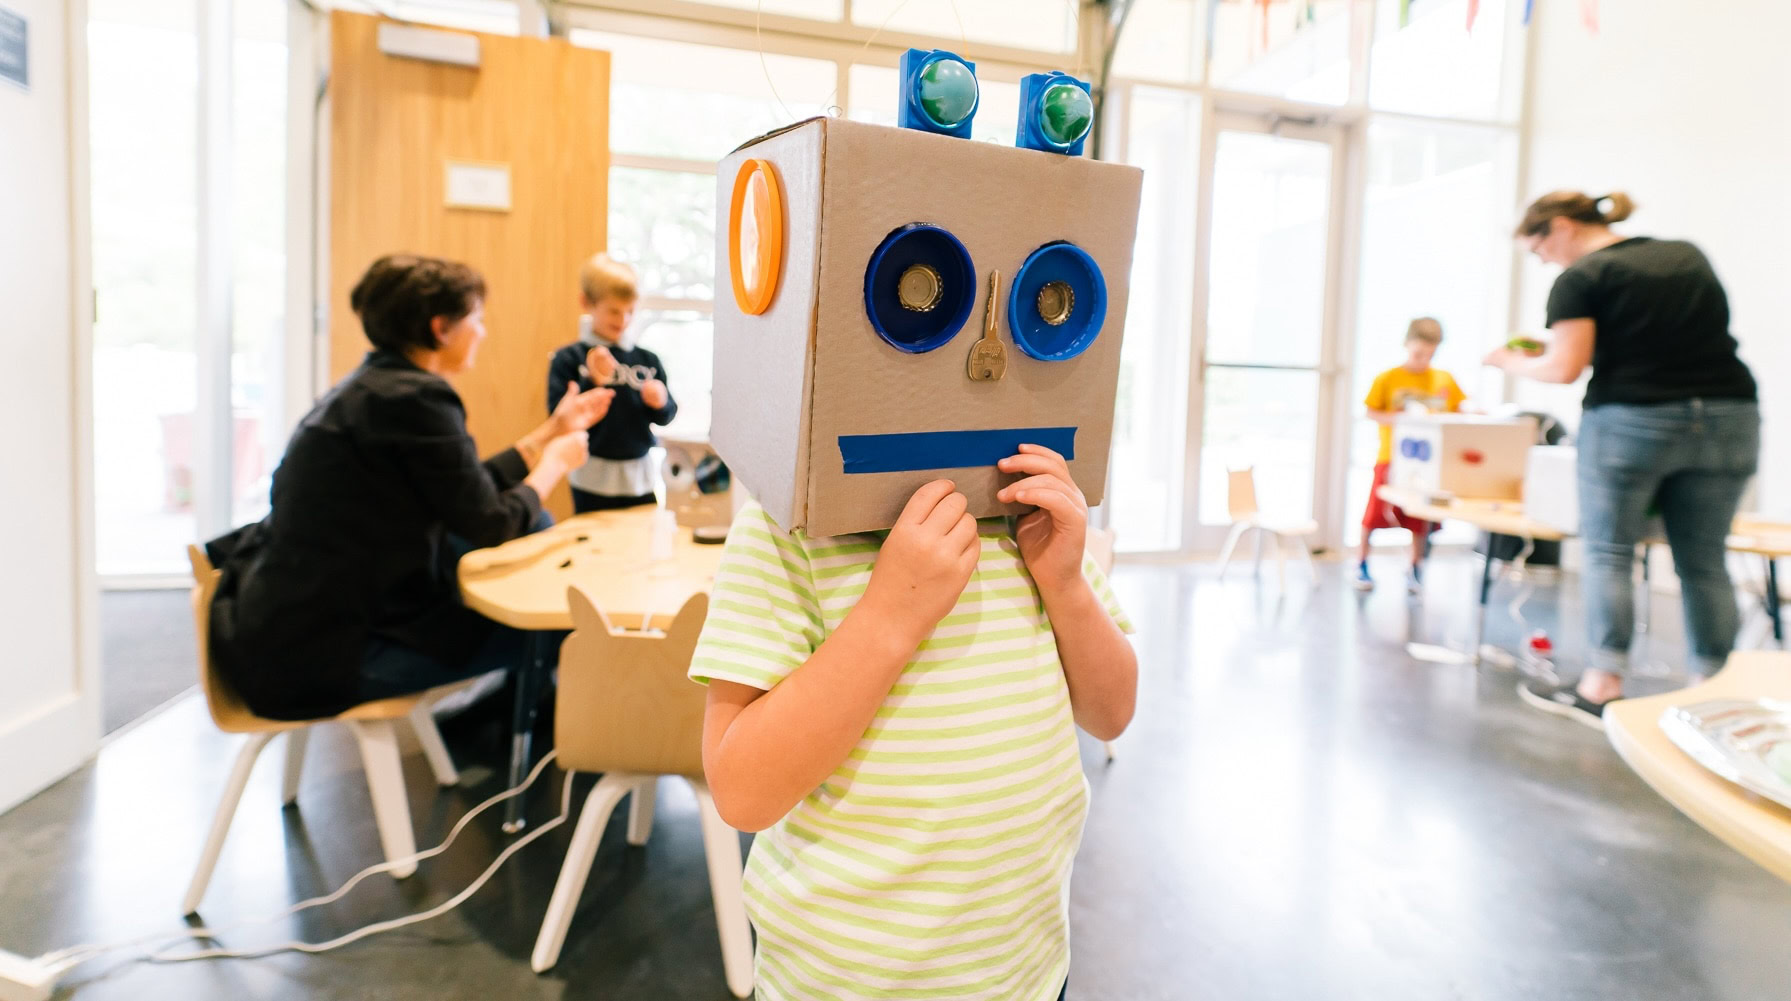 A young child with a cardboard box decorated as a robot placed on their head